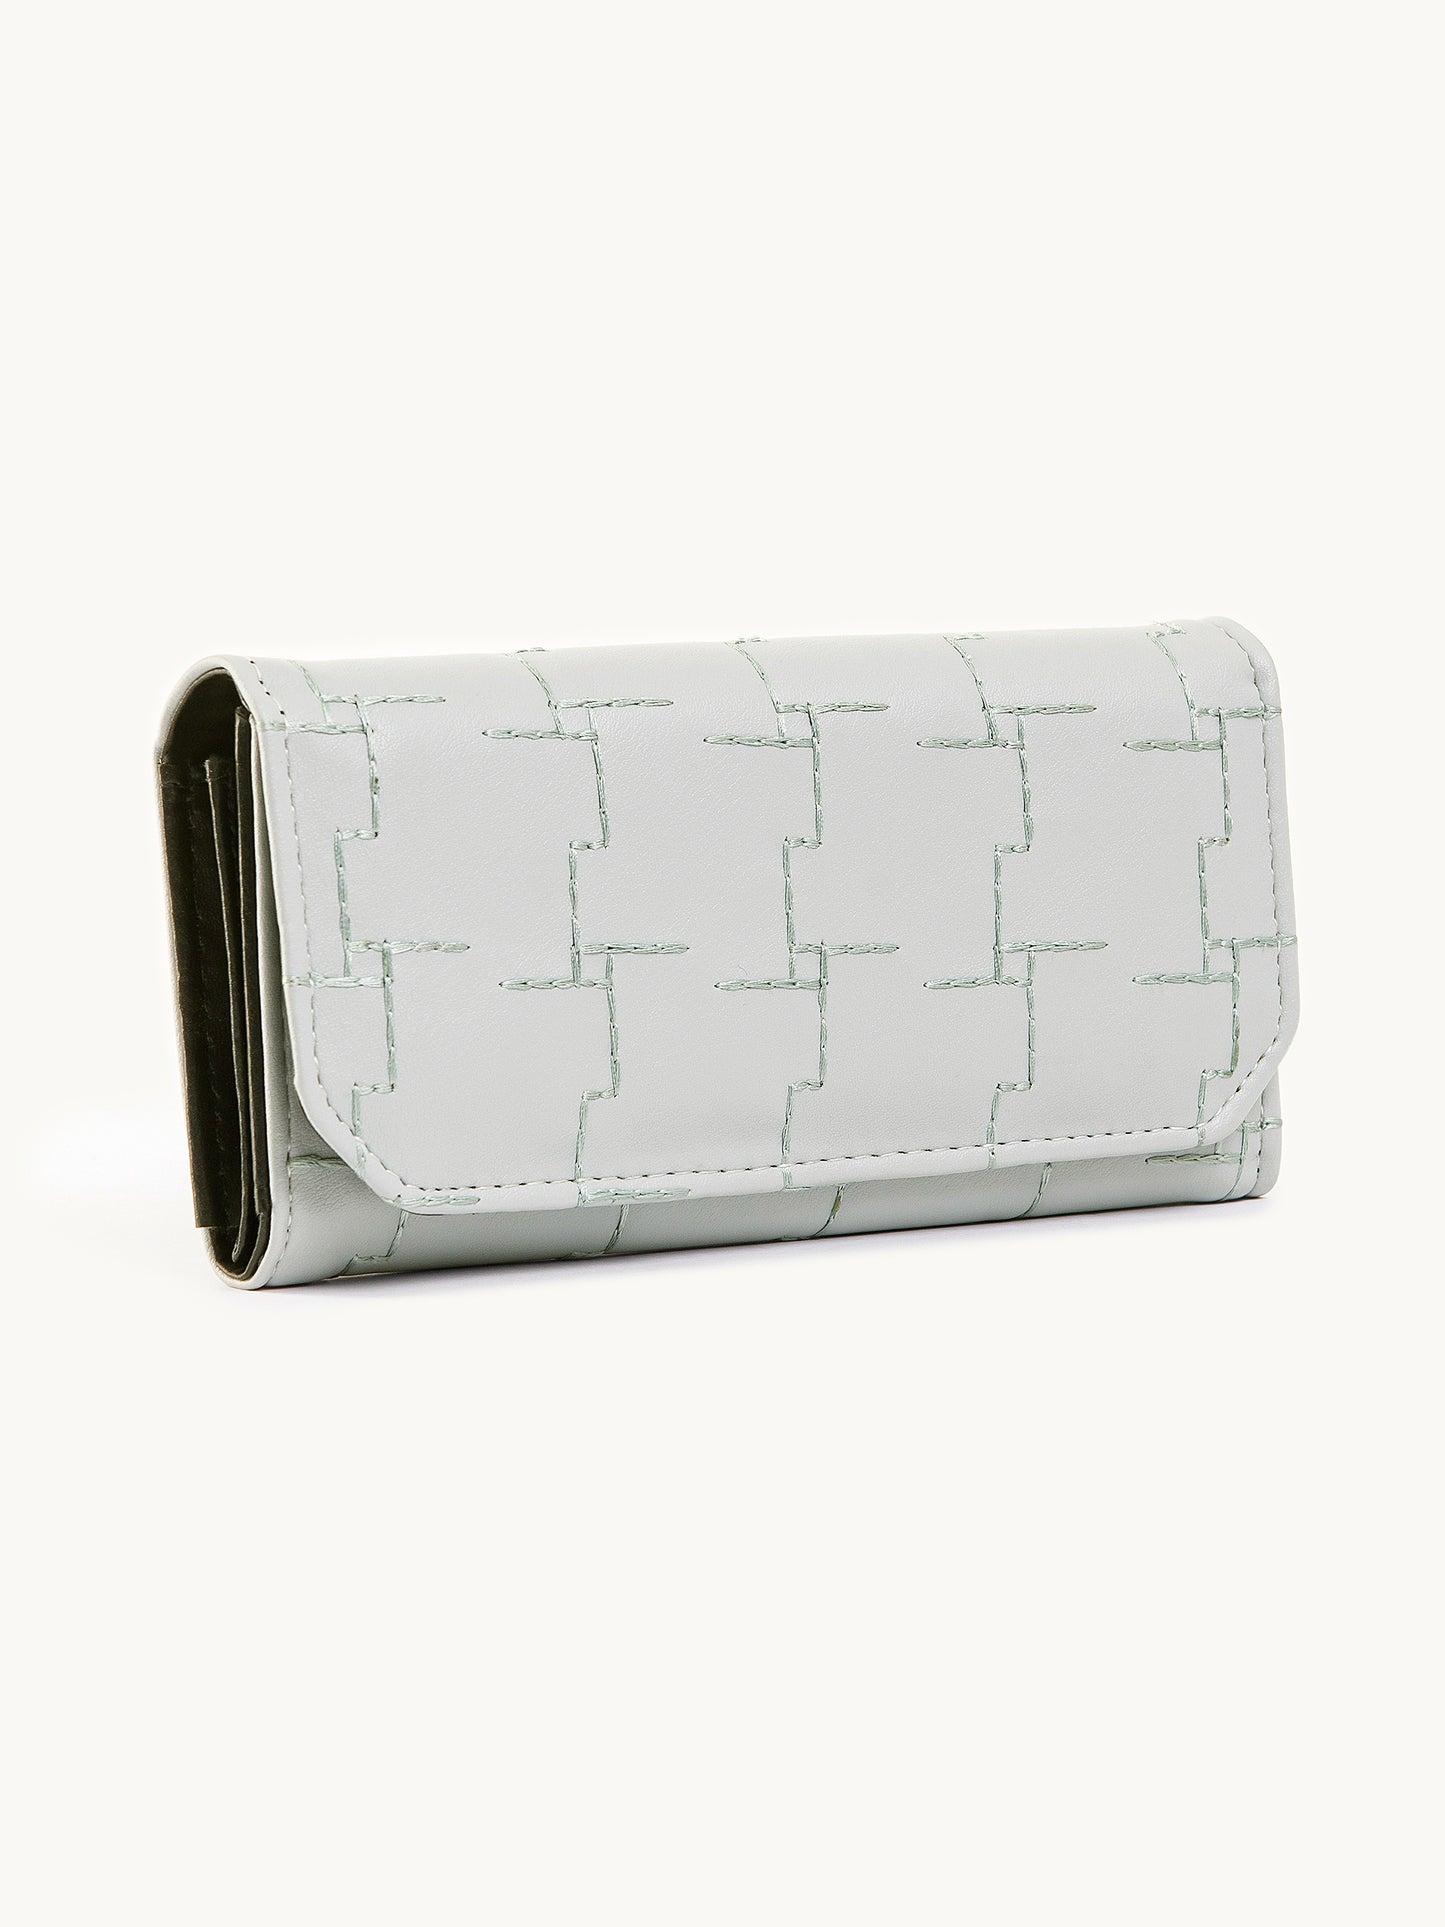 Embroidered Patterned Wallet